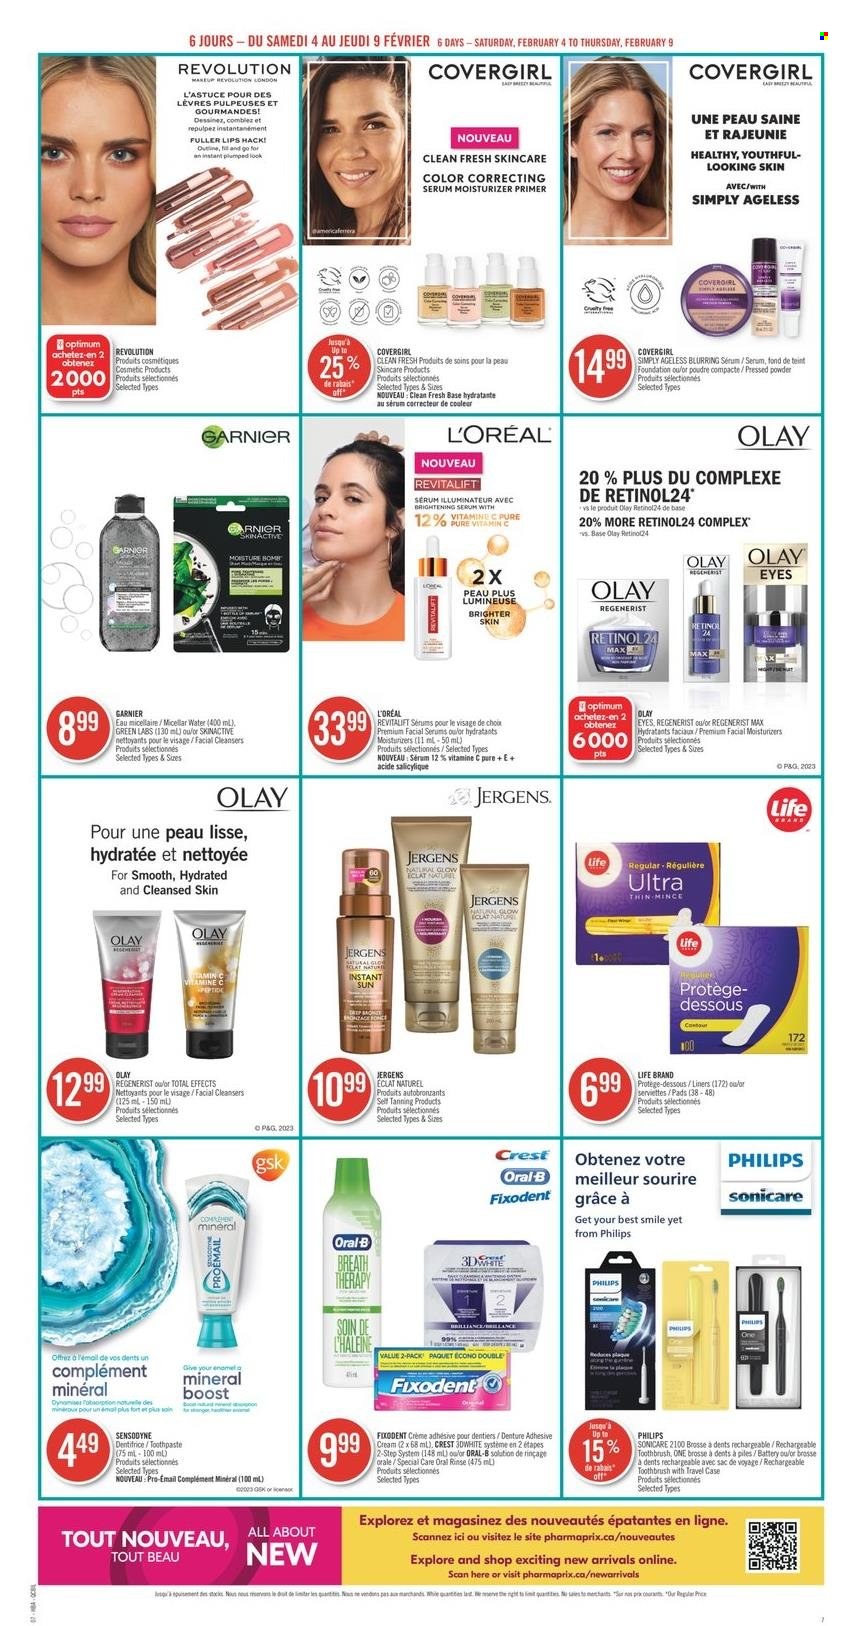 thumbnail - Pharmaprix Flyer - February 04, 2023 - February 09, 2023 - Sales products - Philips, Boost, toothbrush, toothpaste, Fixodent, Crest, brightening serum, L’Oréal, micellar water, moisturizer, serum, Olay, Jergens, Eclat, makeup, face powder, Optimum, Sonicare, vitamin c, Garnier, Oral-B, Sensodyne. Page 13.